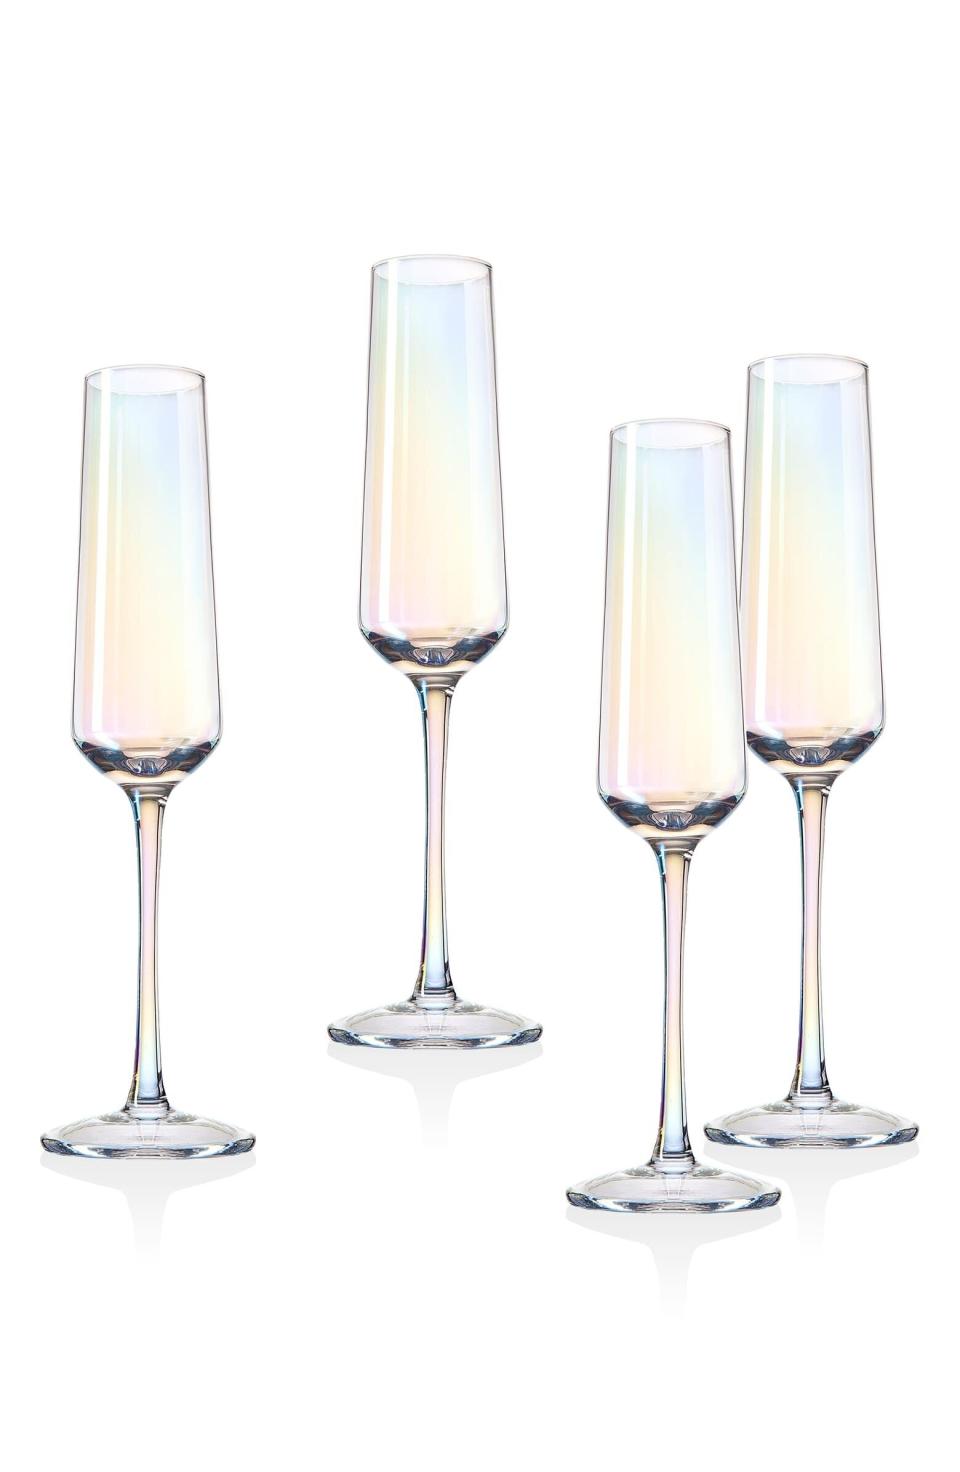 A graduating grad is always a cause for celebrating. They can definitely <a href="https://fave.co/2ZidTQl" target="_blank" rel="noopener noreferrer">toast with these</a>. <a href="https://fave.co/3bI85SZ" target="_blank" rel="noopener noreferrer">Find the set of four for $32 at Nordstrom</a>.